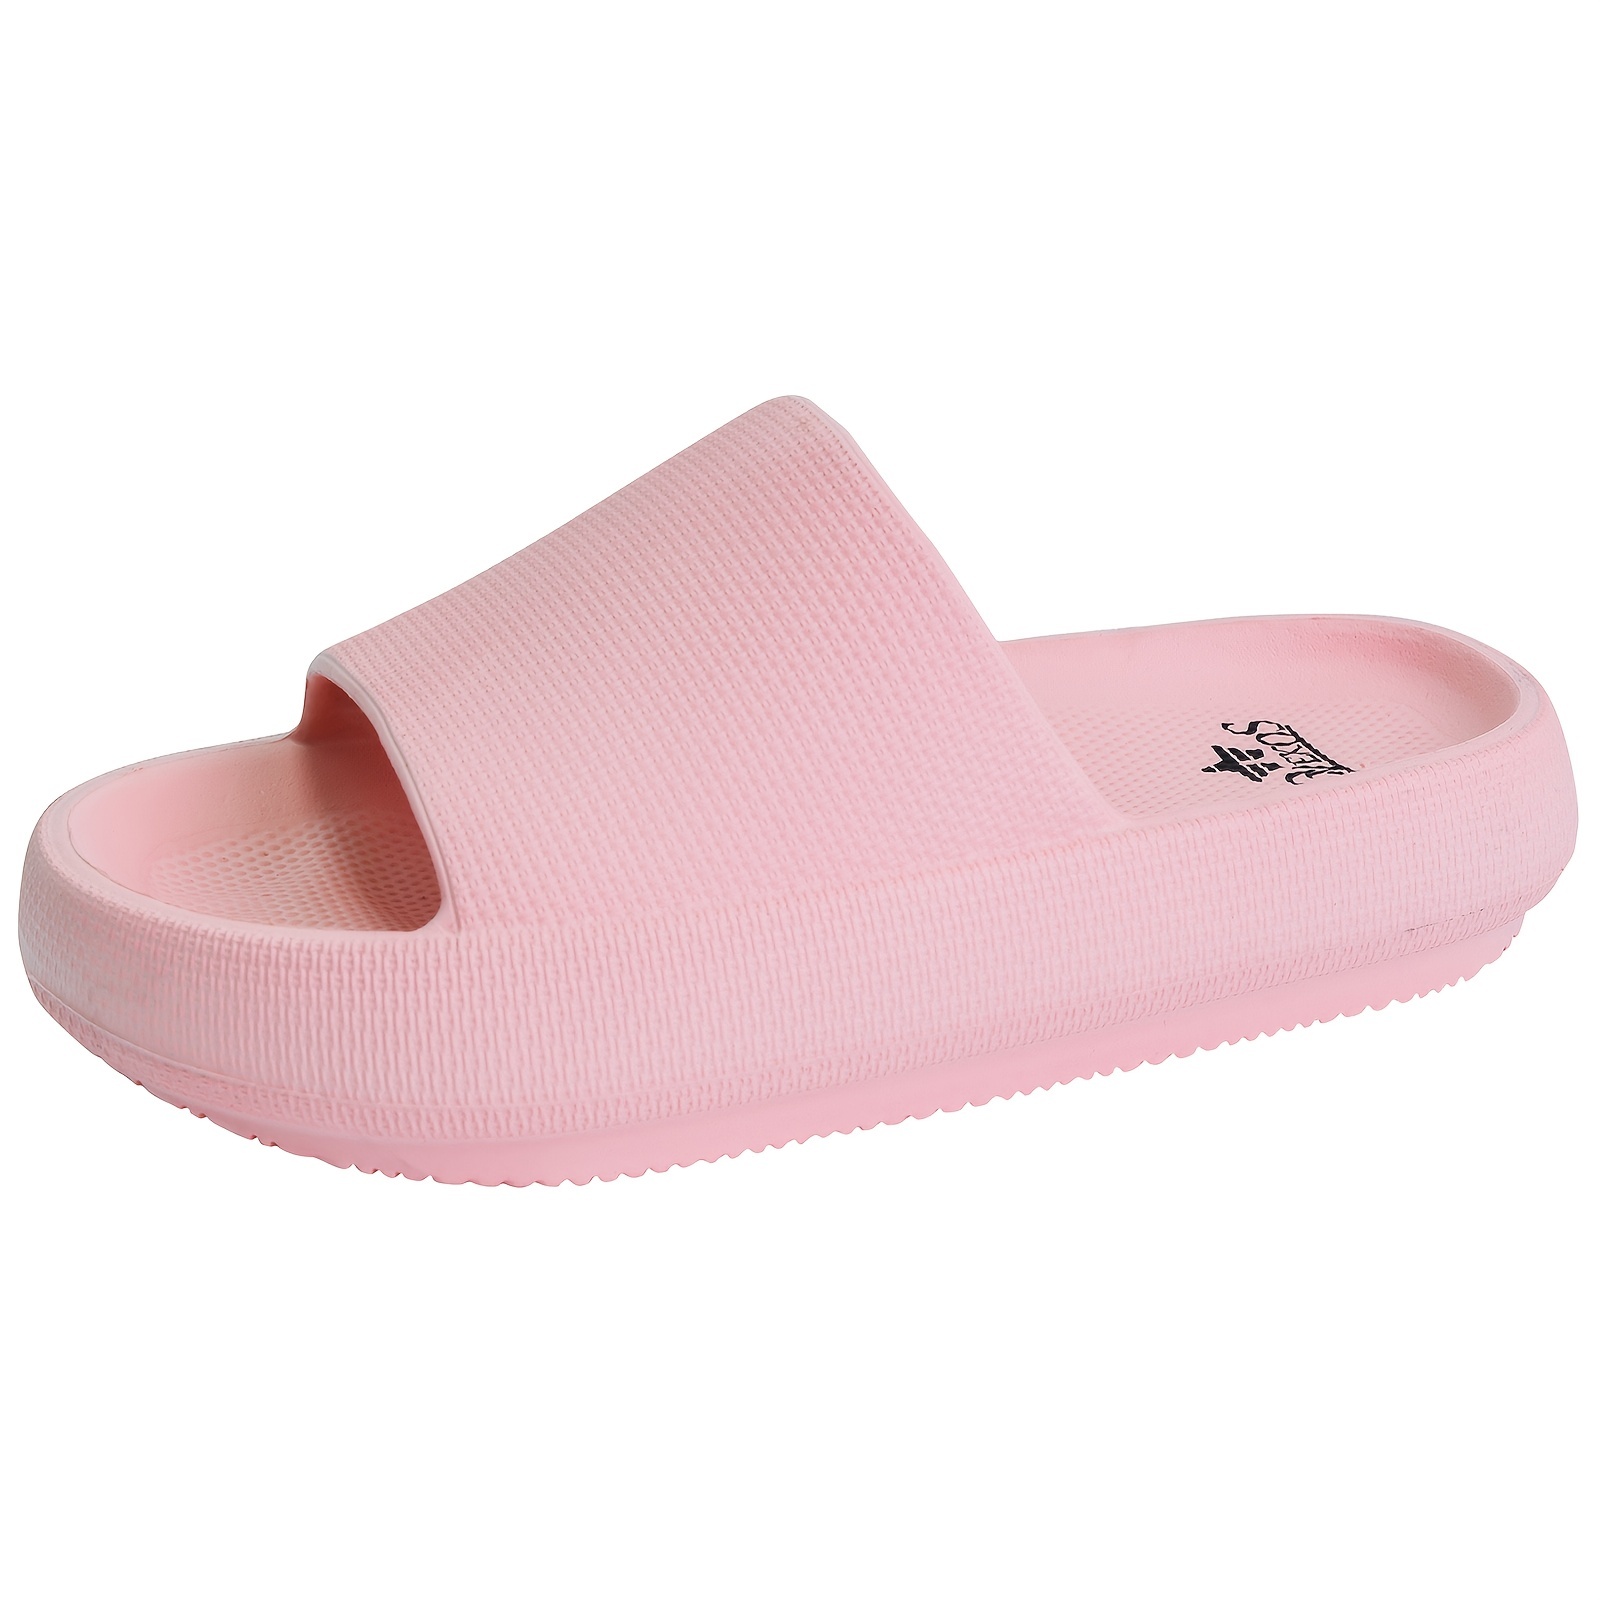 Girls' Casual Slippers & Platform Shower Sandals at Our Store